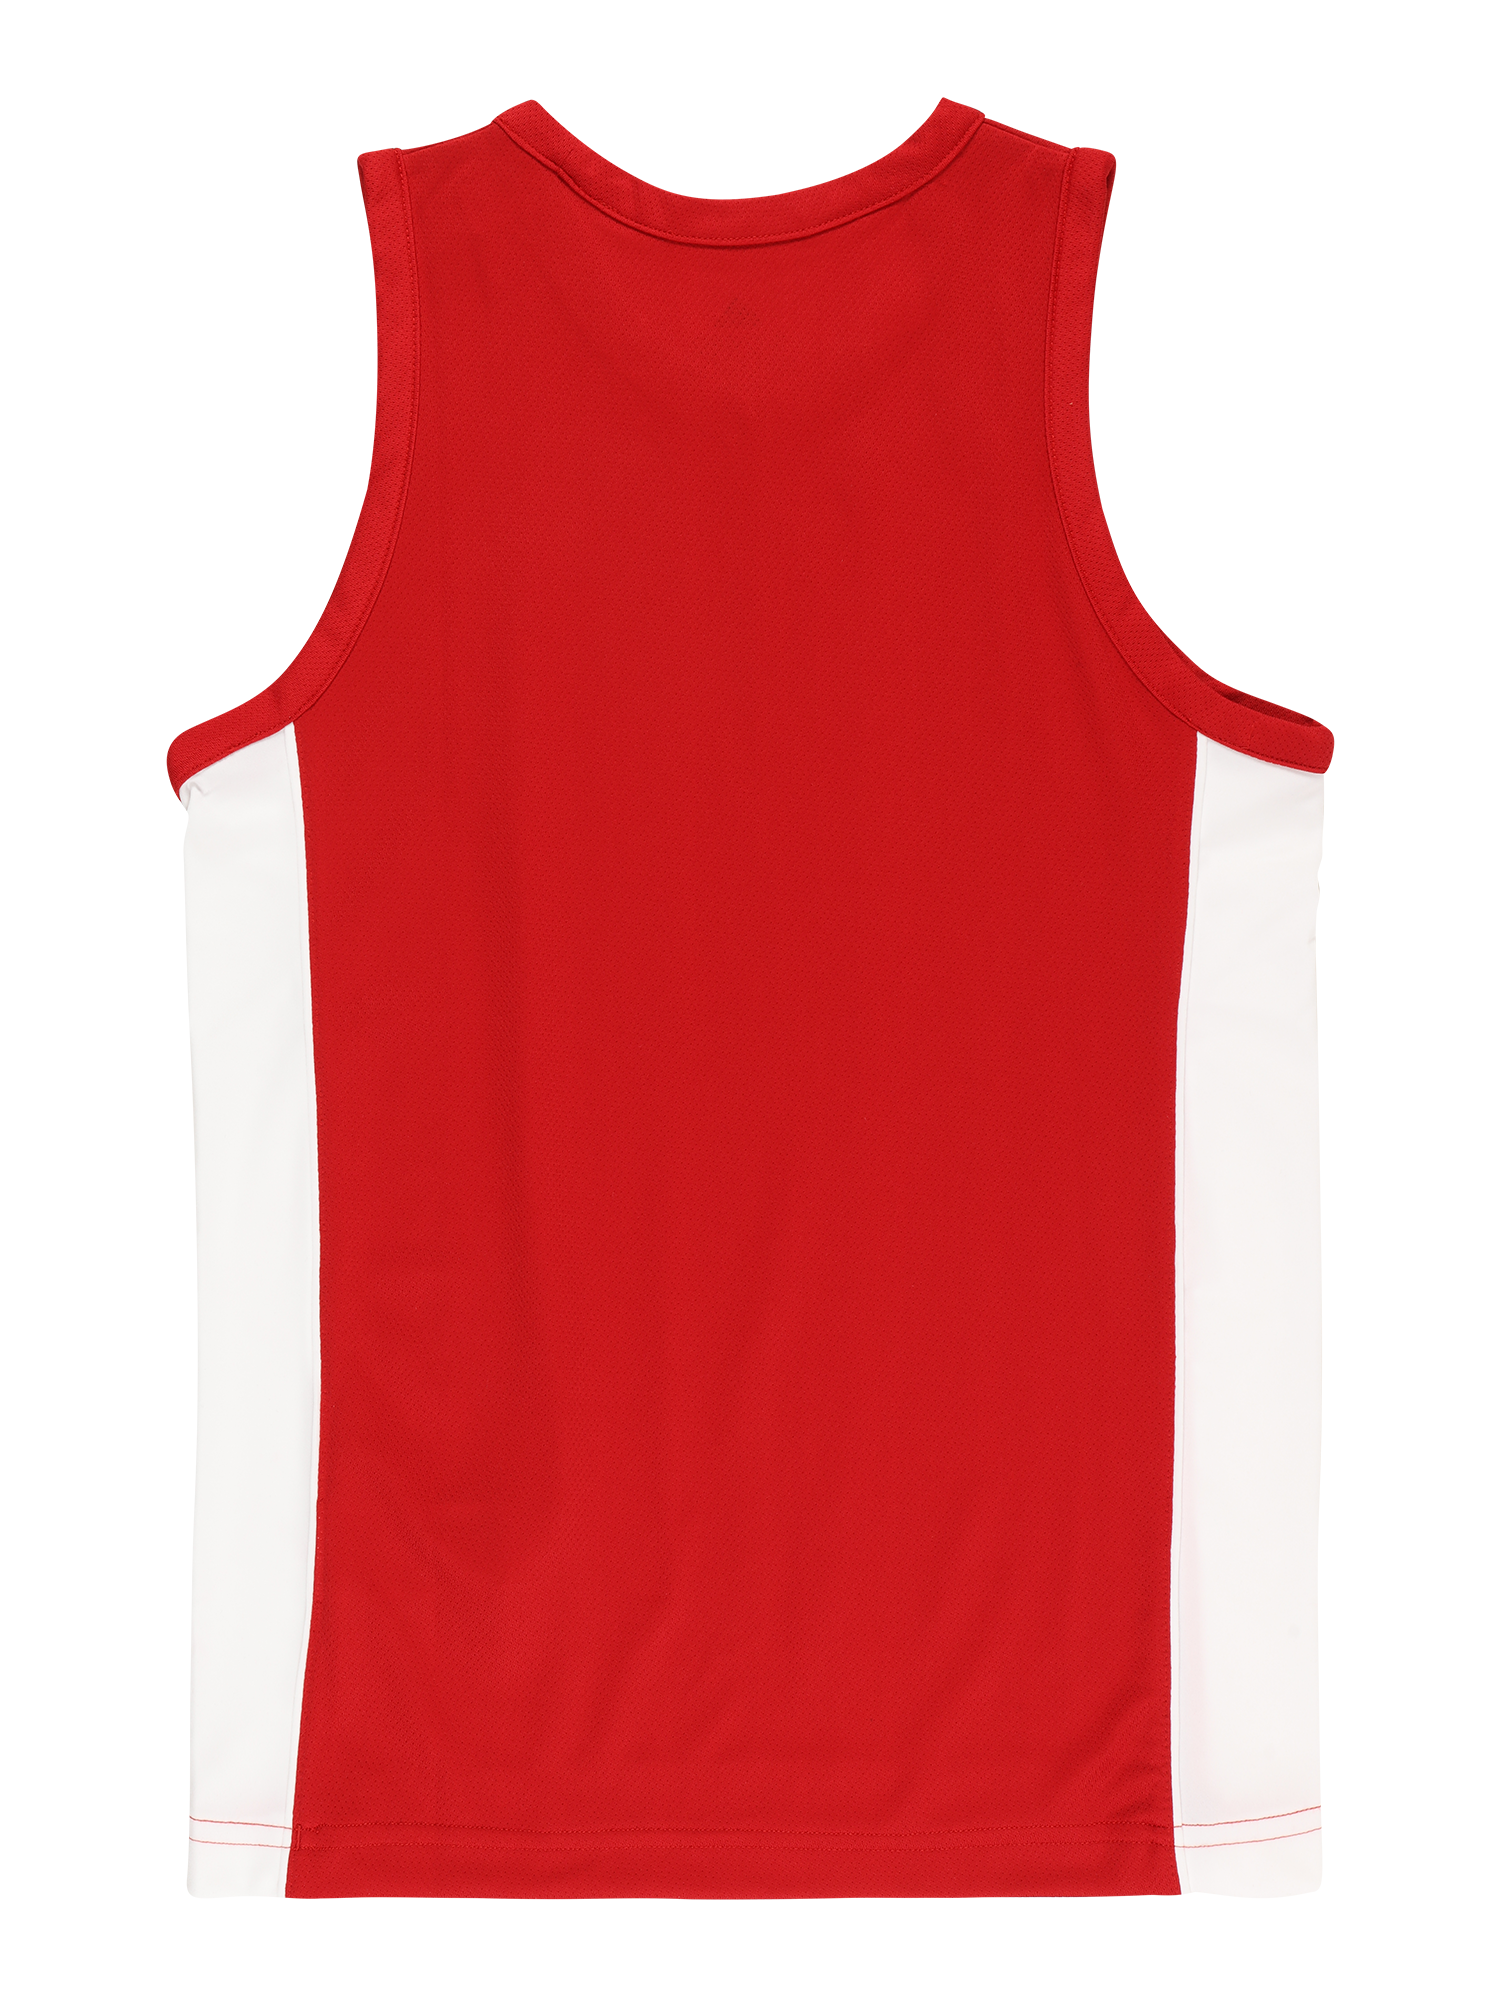 Bimba LPElt ADIDAS PERFORMANCE Maglia funzionale N3XT Prime Game in Rosso 